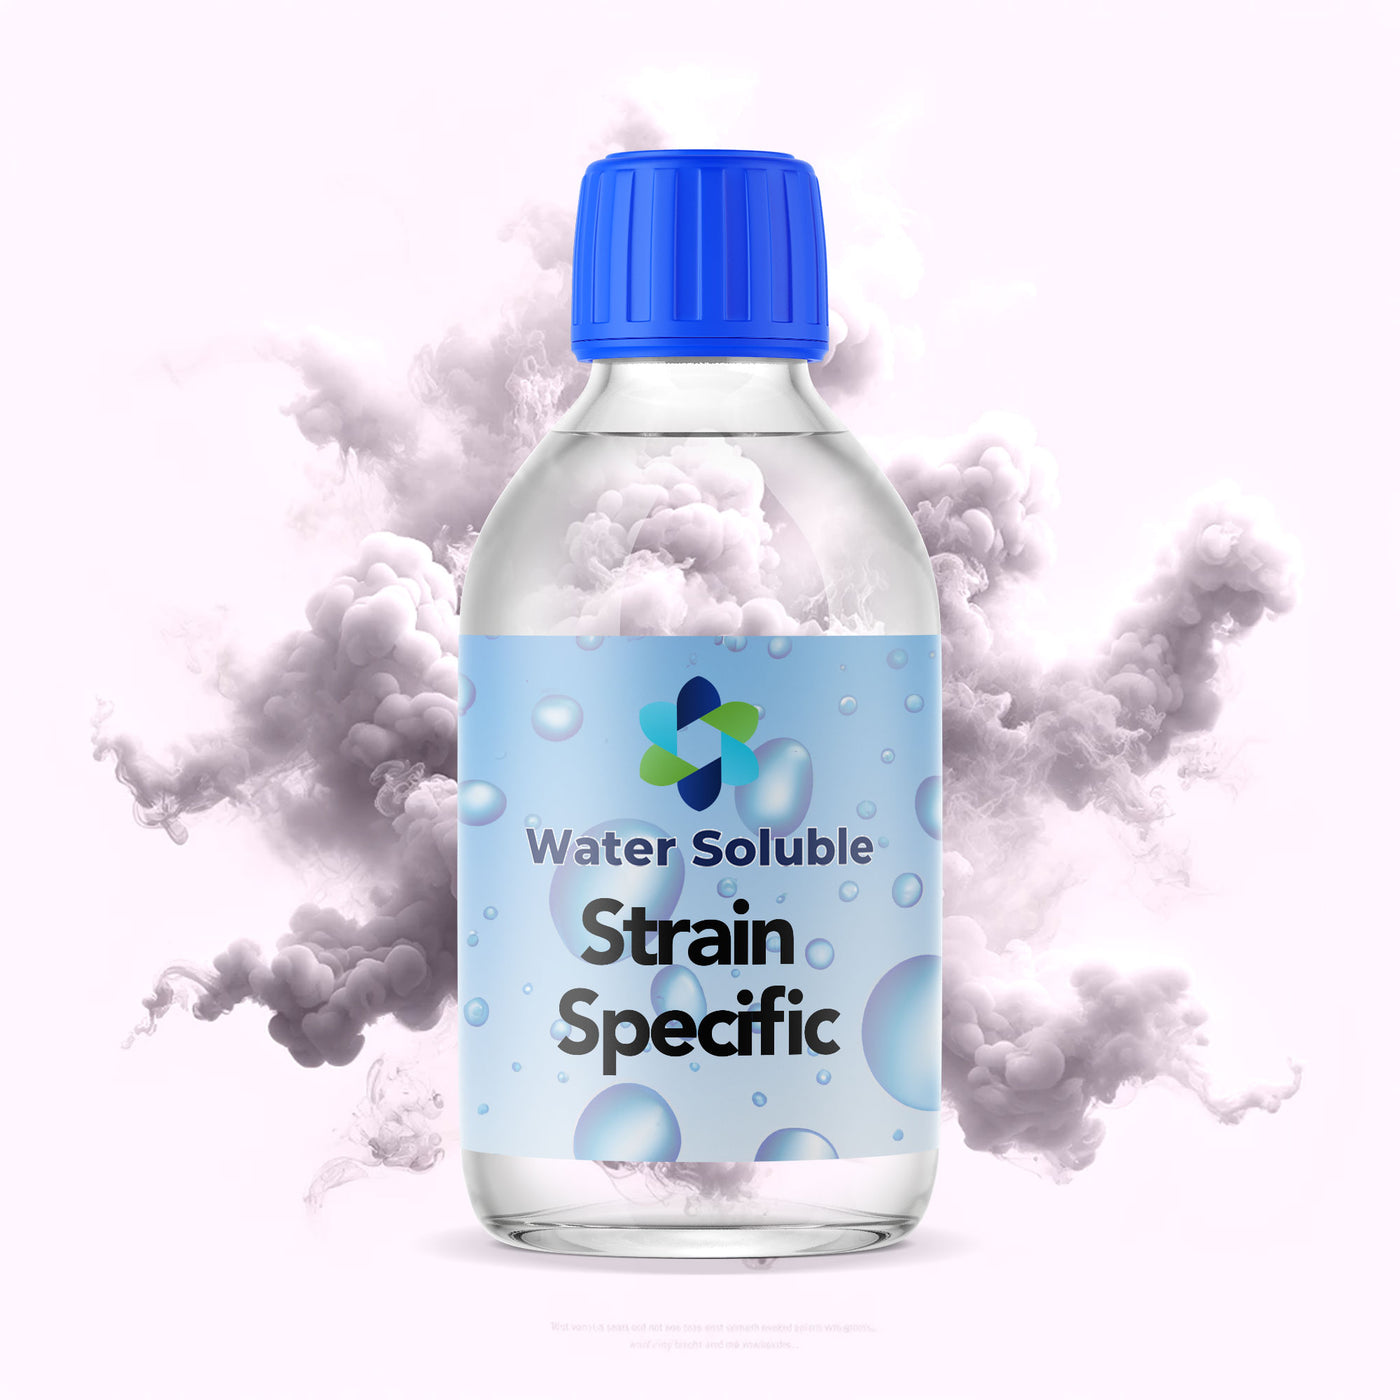 Water Soluble Strain Specific